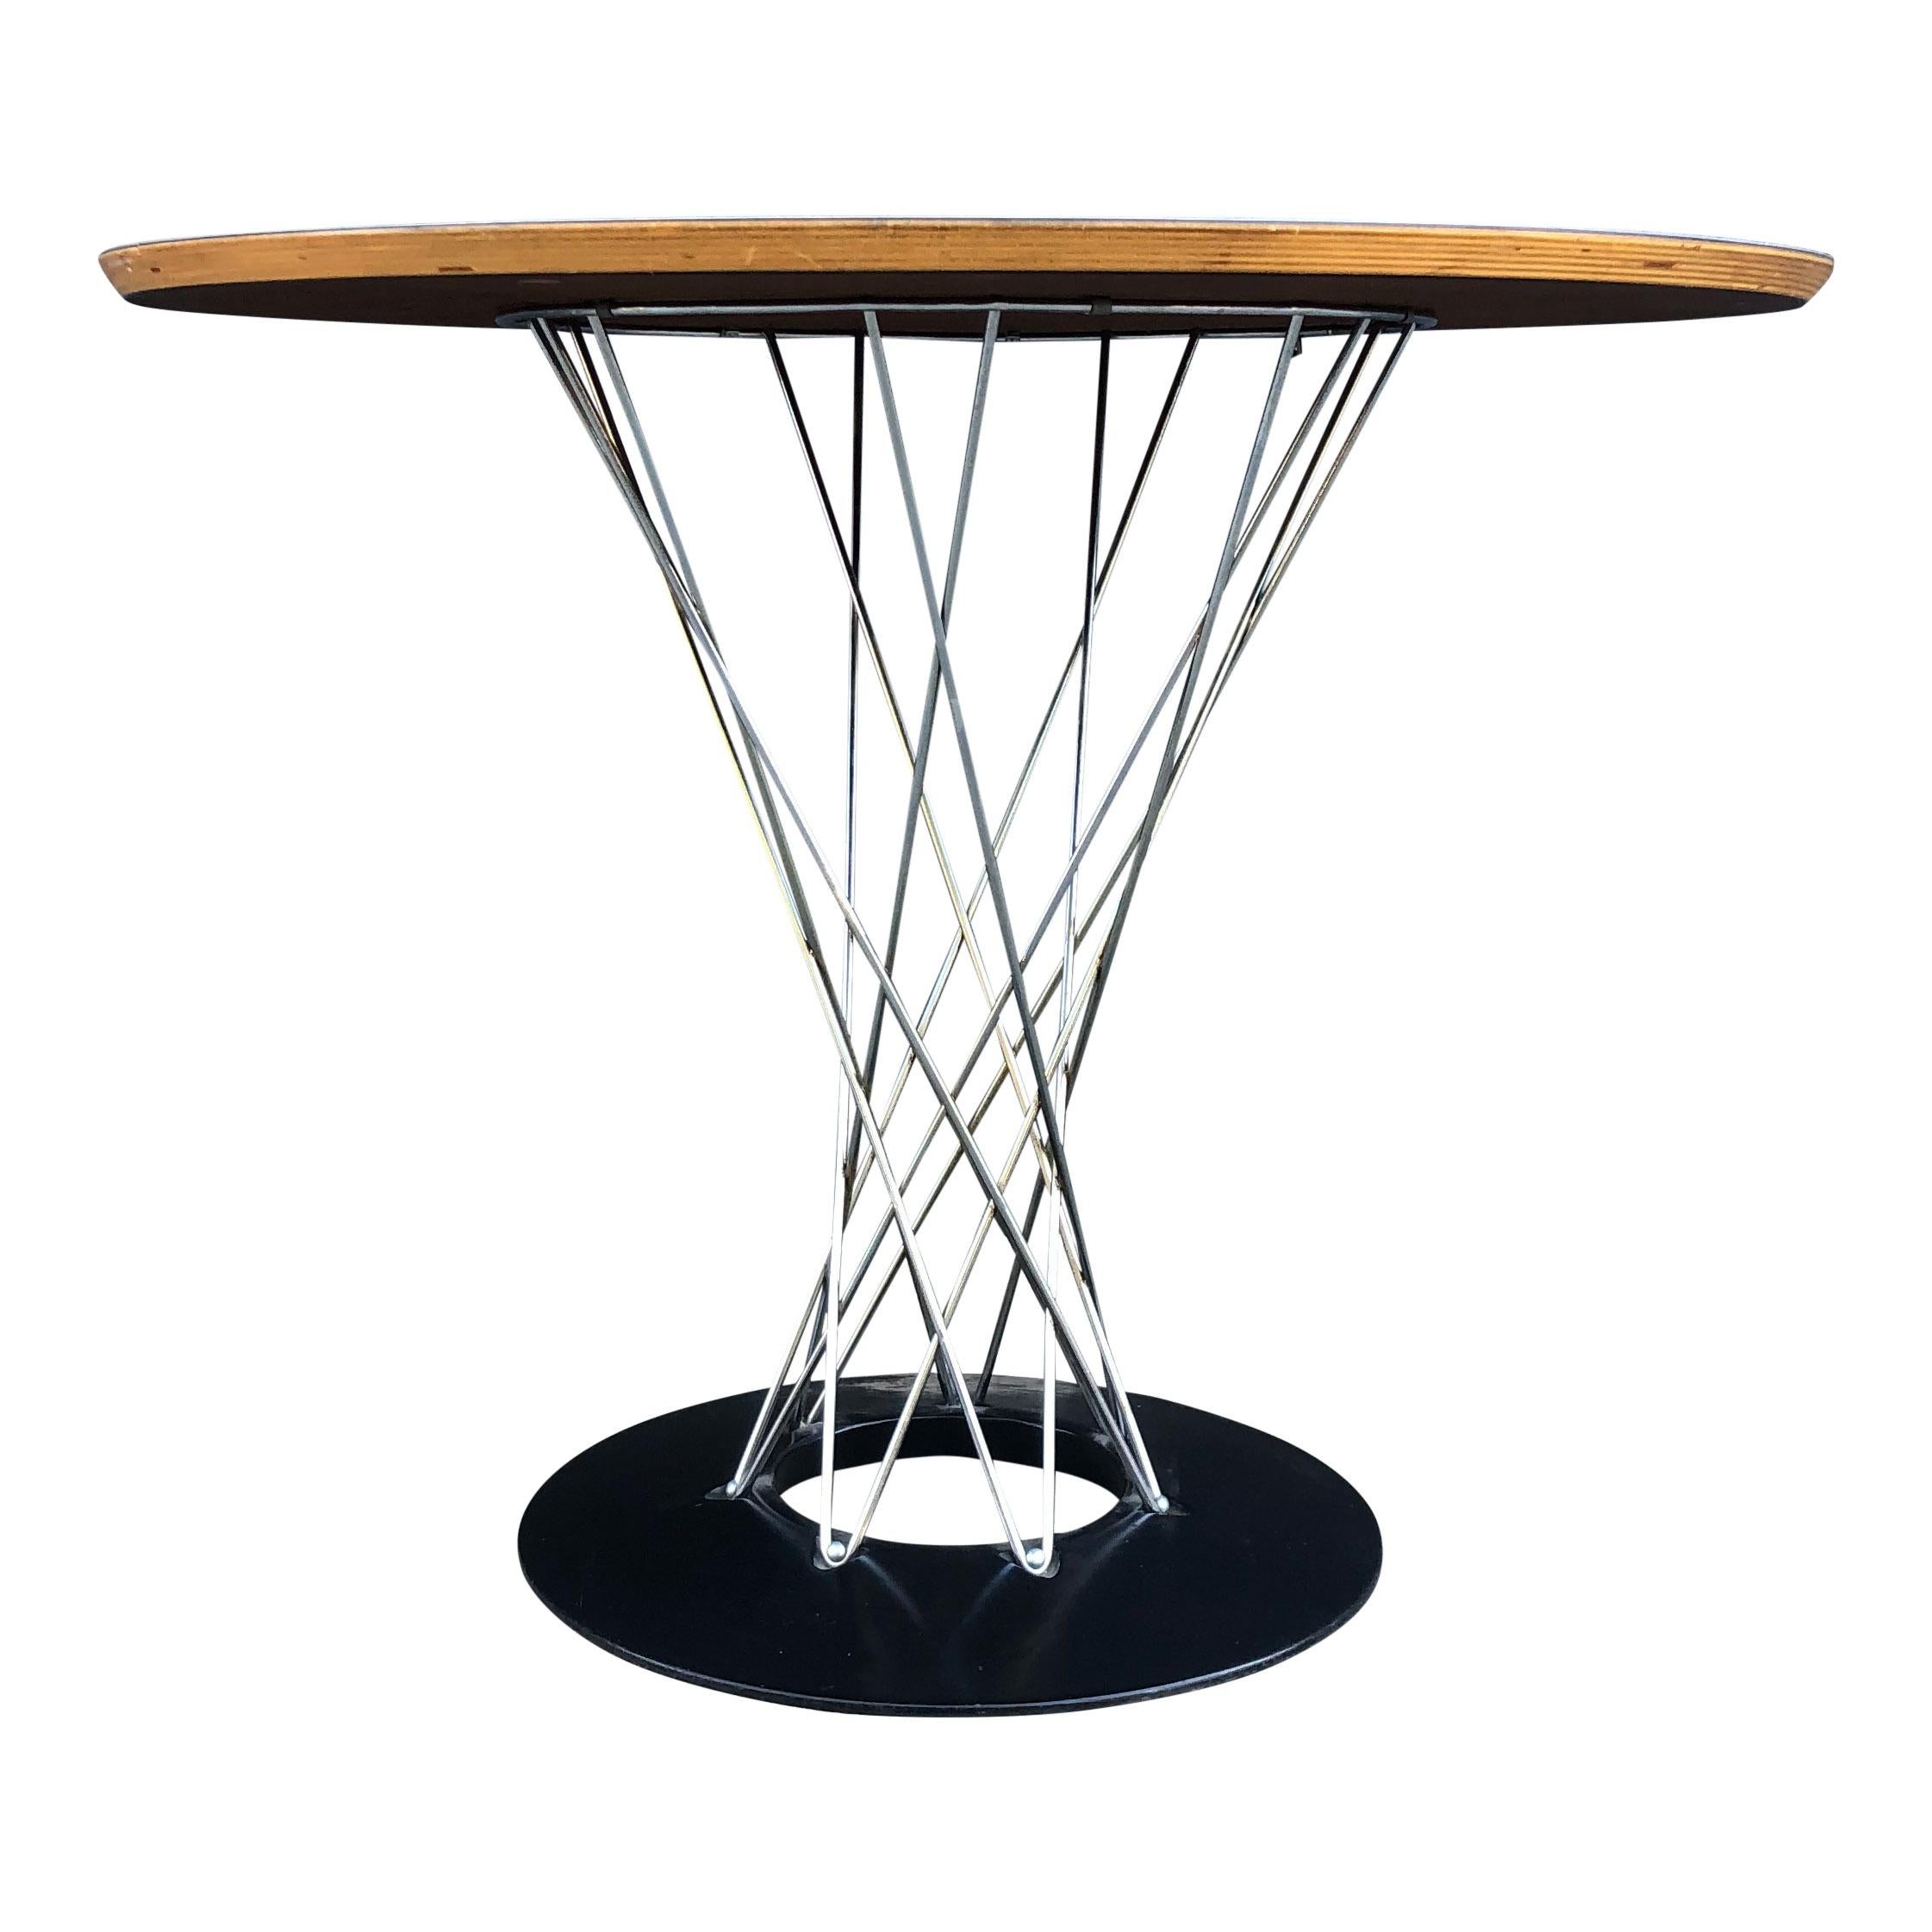 For sale is vintage Isamu Noguchi for Knoll cyclone table with a white laminate top.

This is a great piece of Mid-Century Modern design produced by Knoll in the 1950s and 1960s. It features a cast iron base coated in porcelain, twisting chrome